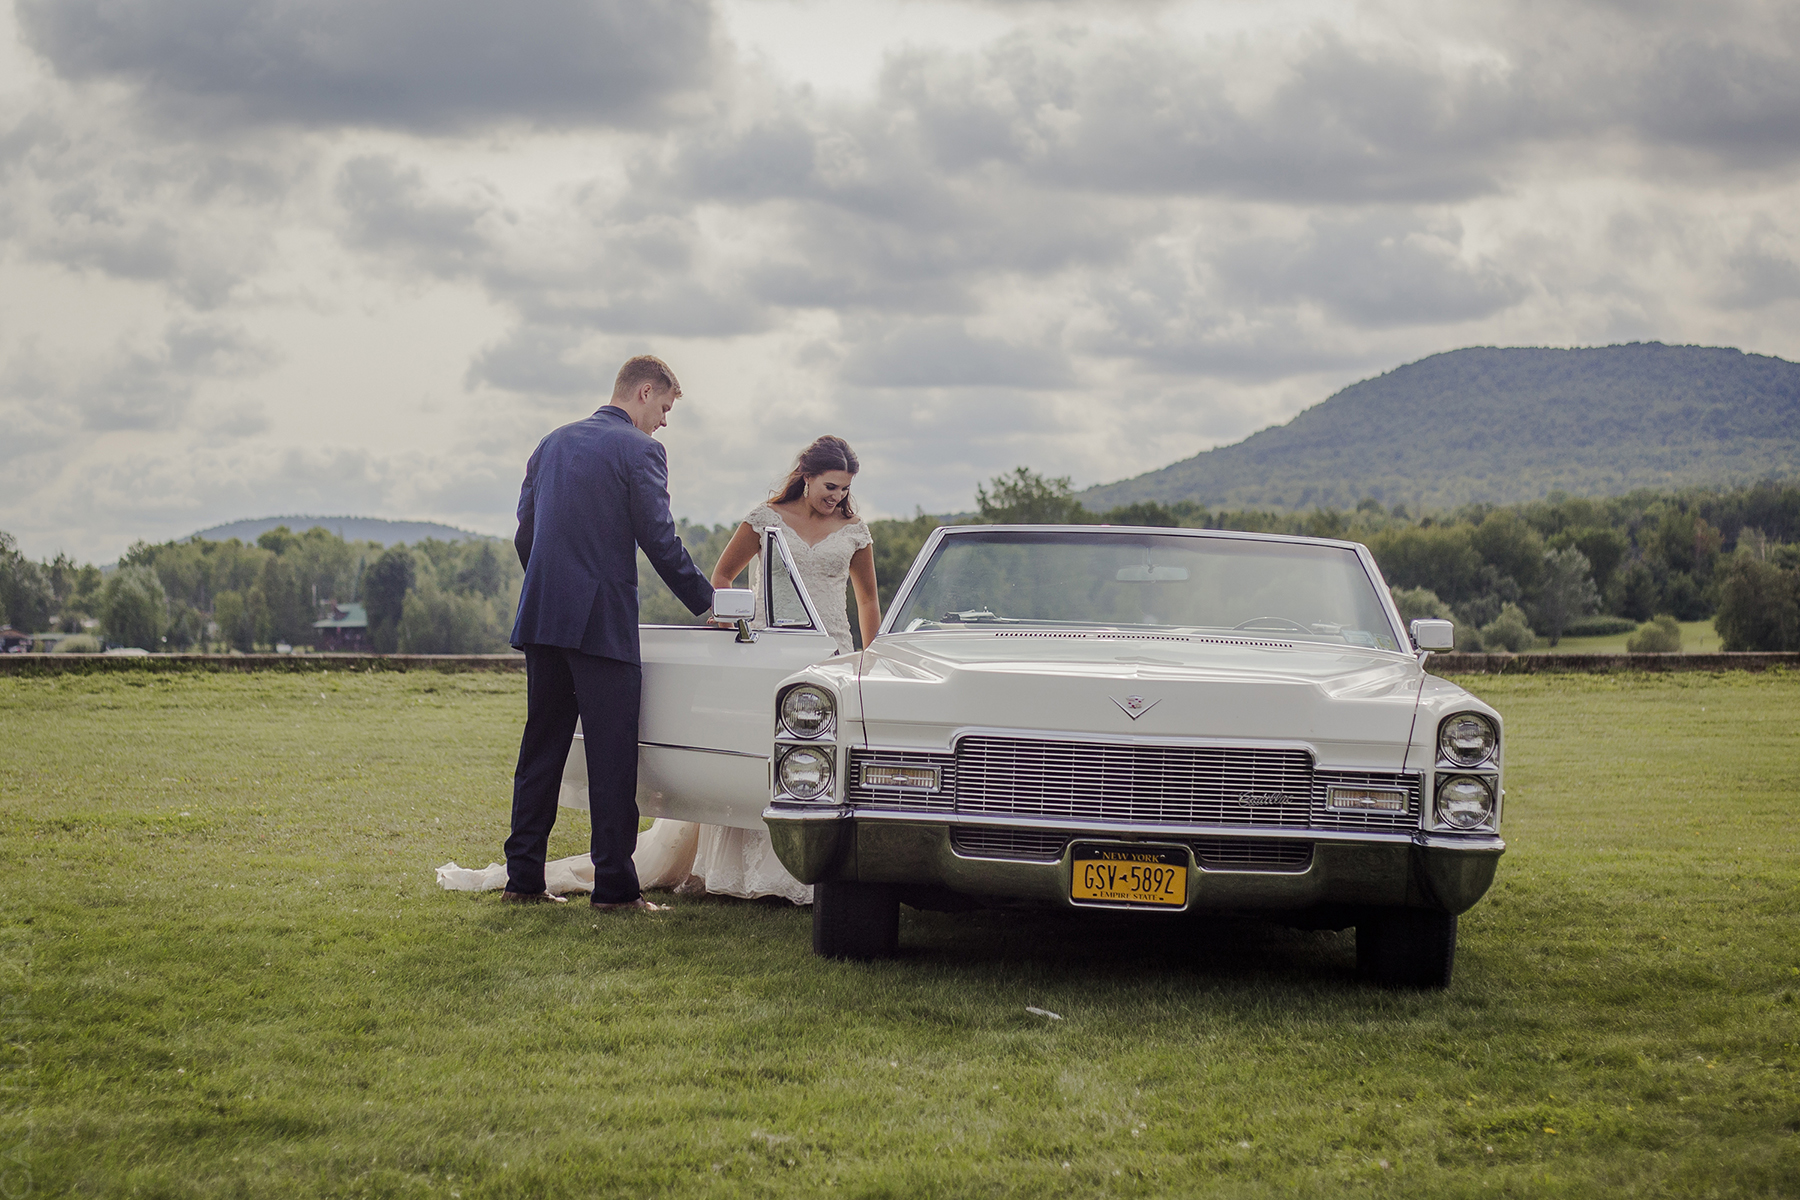 Fairytale Dreams Photography - Specializing in Candid Wedding Photography NY-374, Lyon Mountain New York 12952